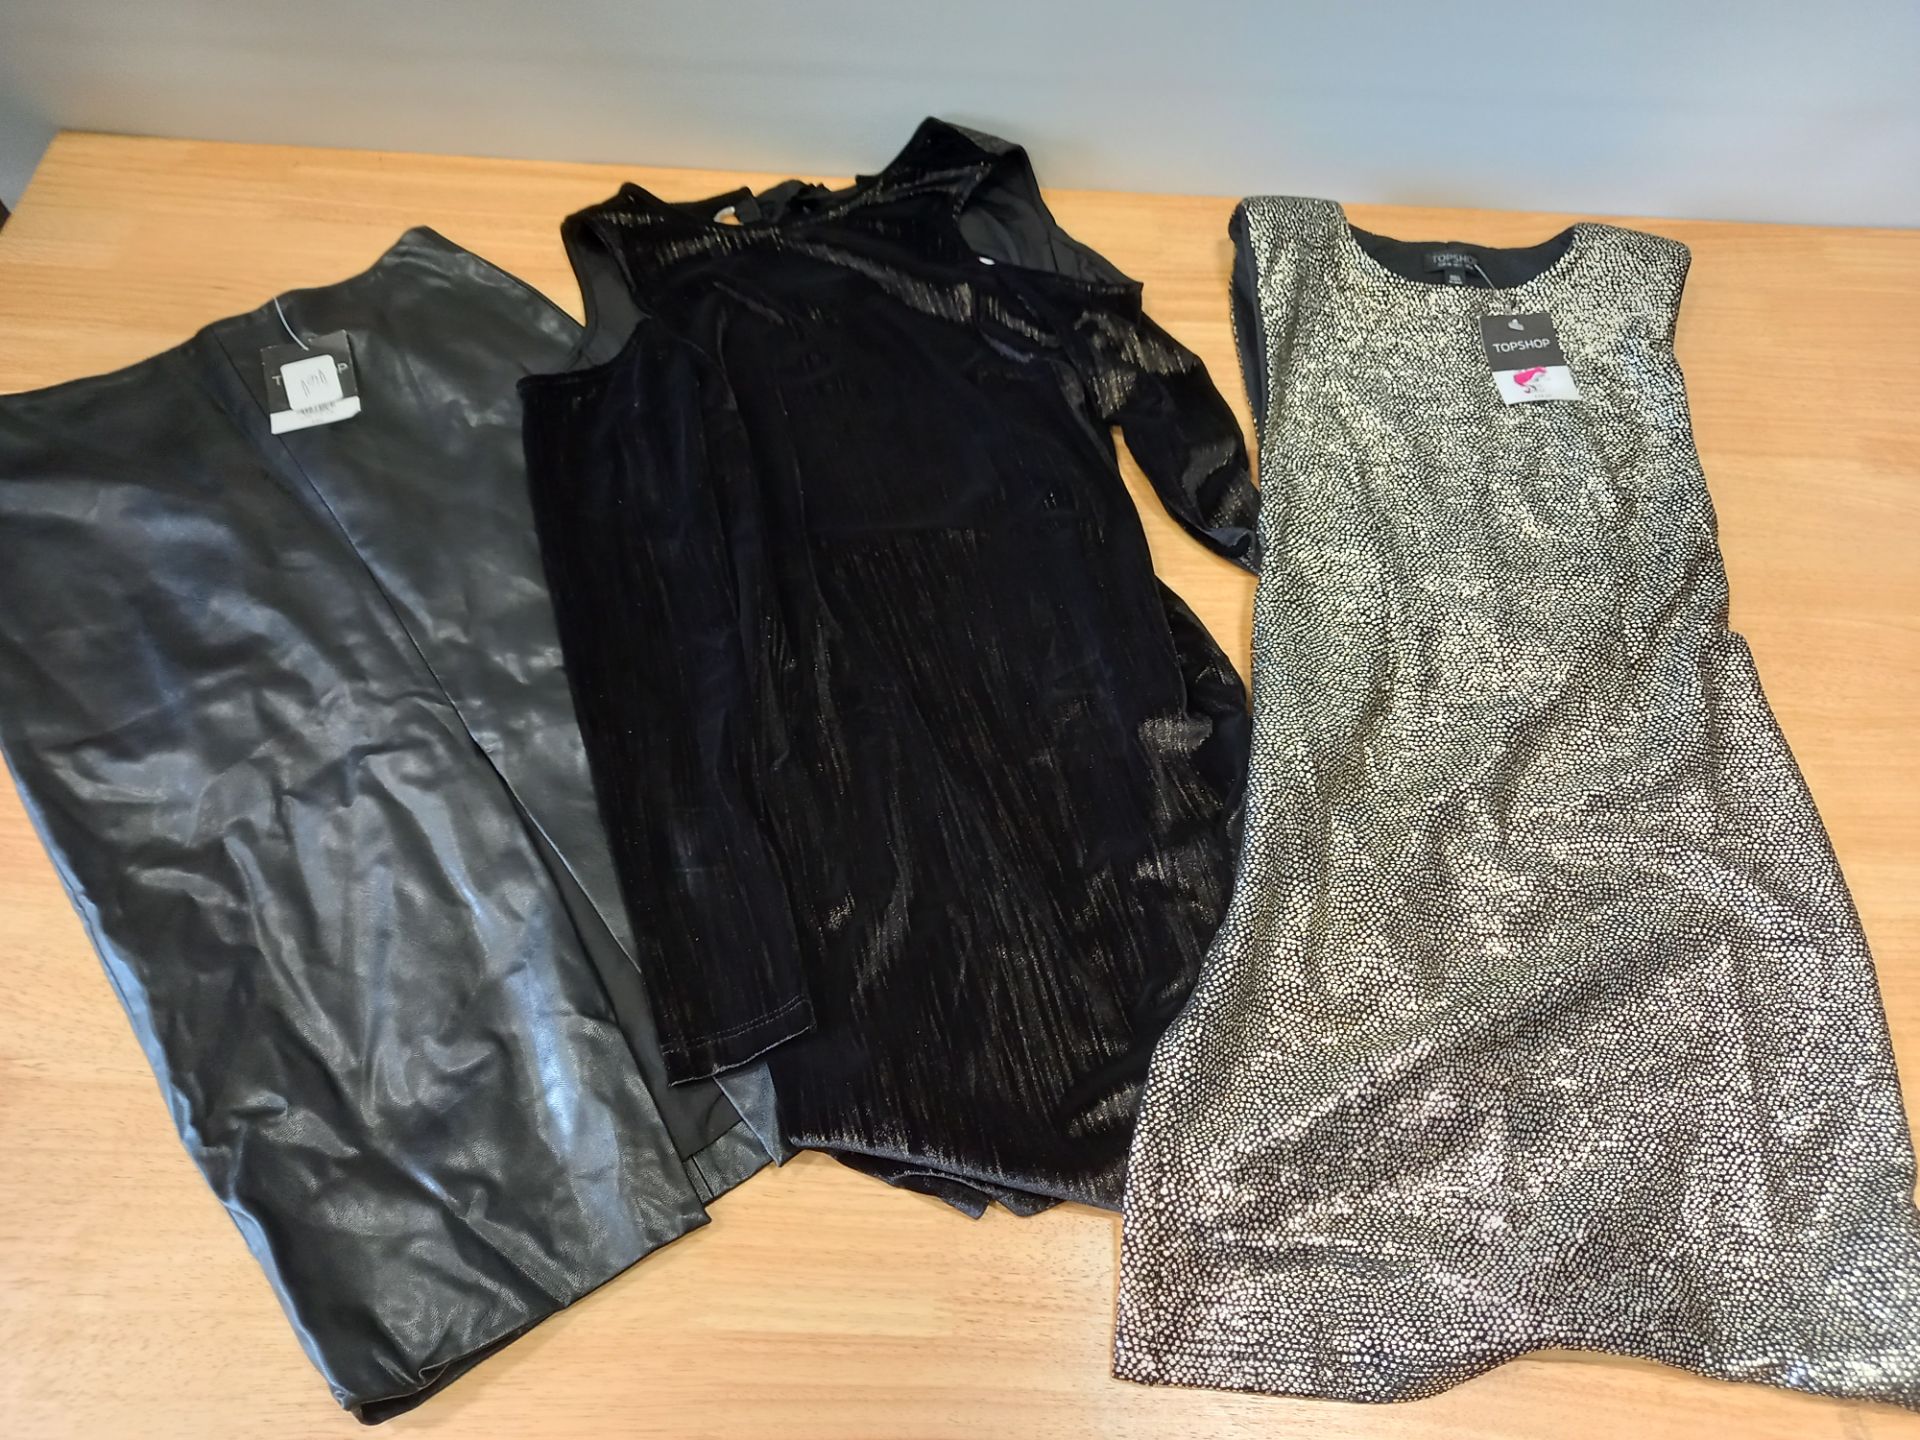 20 PIECE MIXED TOPSHOP AND DOROTHY PRKINS CLOTHING LOT CONTAINING TOPSHOP DRESSES IN VARIOUS